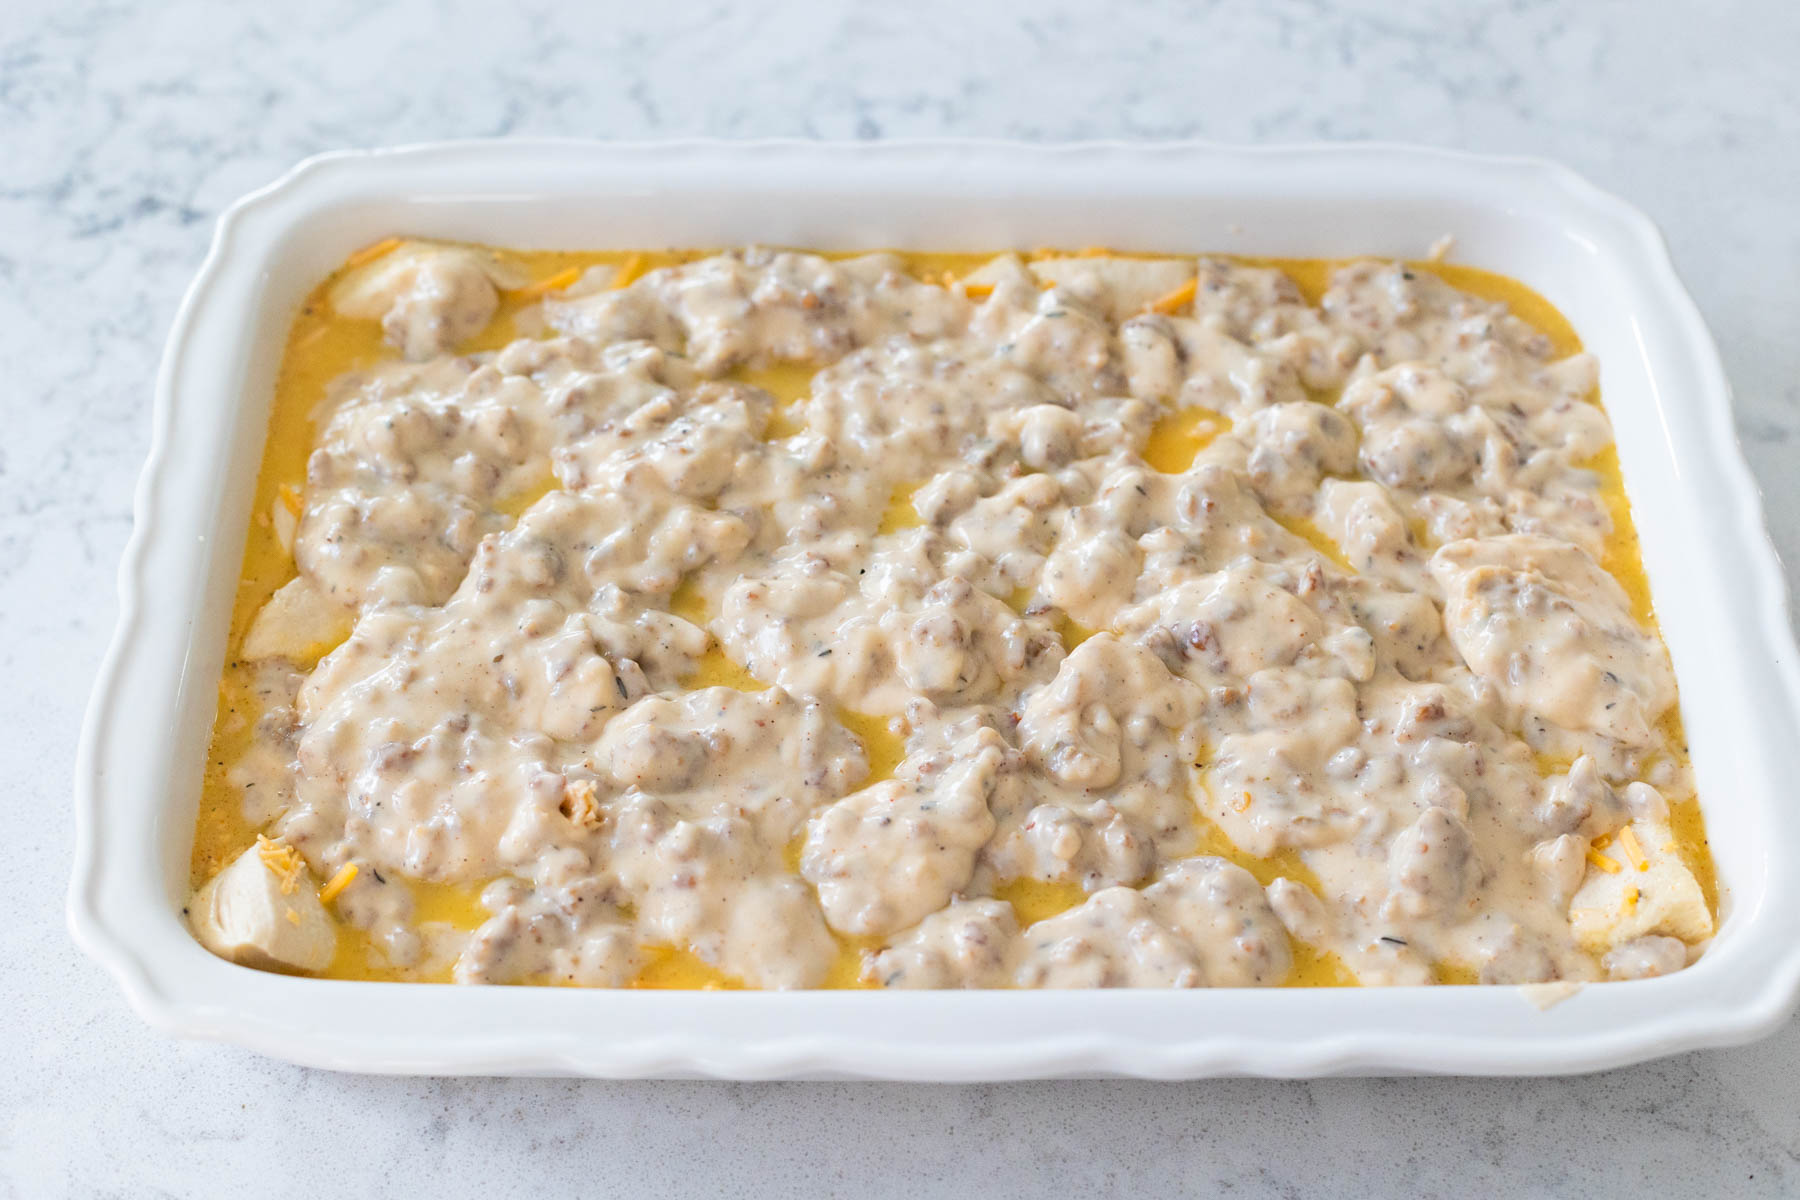 The biscuits and gravy casserole is ready for the oven.